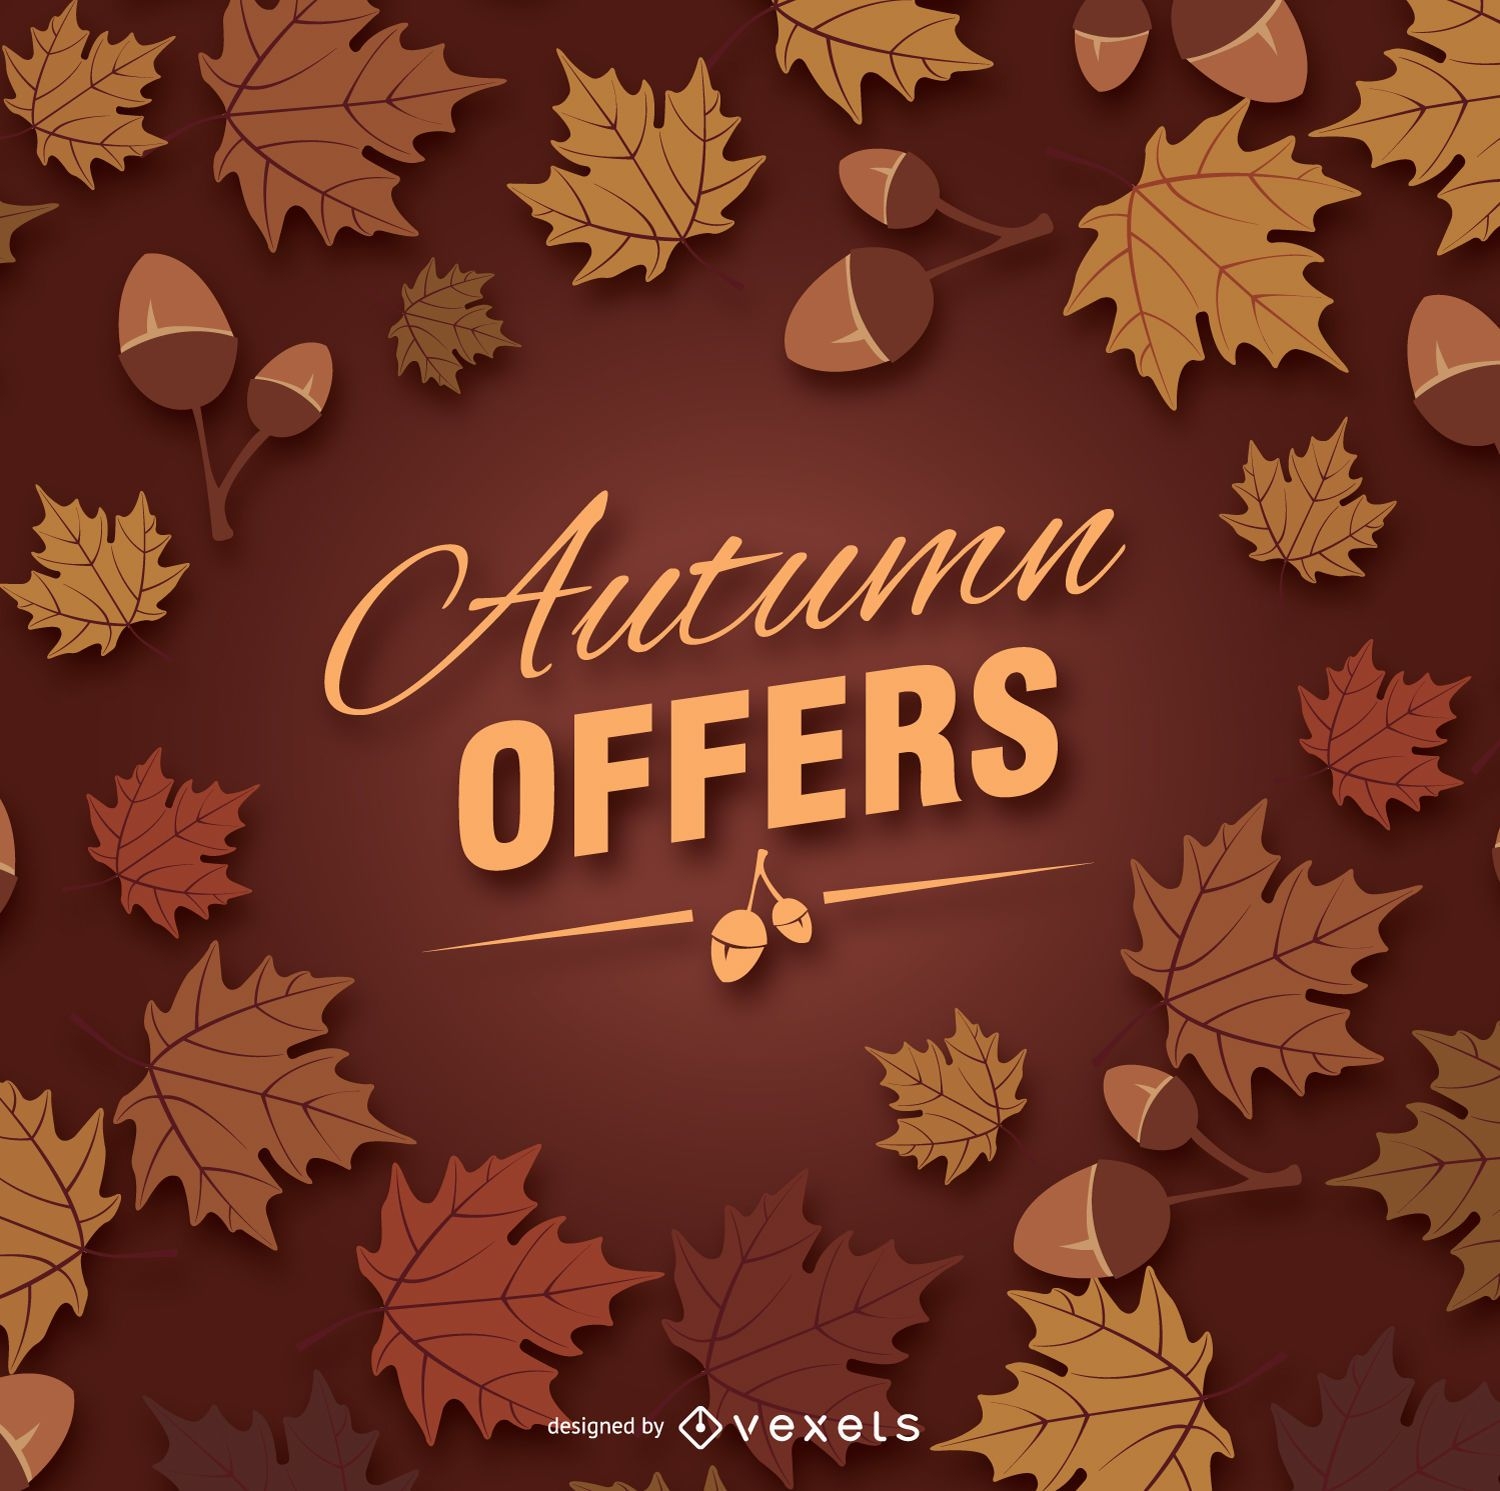 Autumn offers graphic